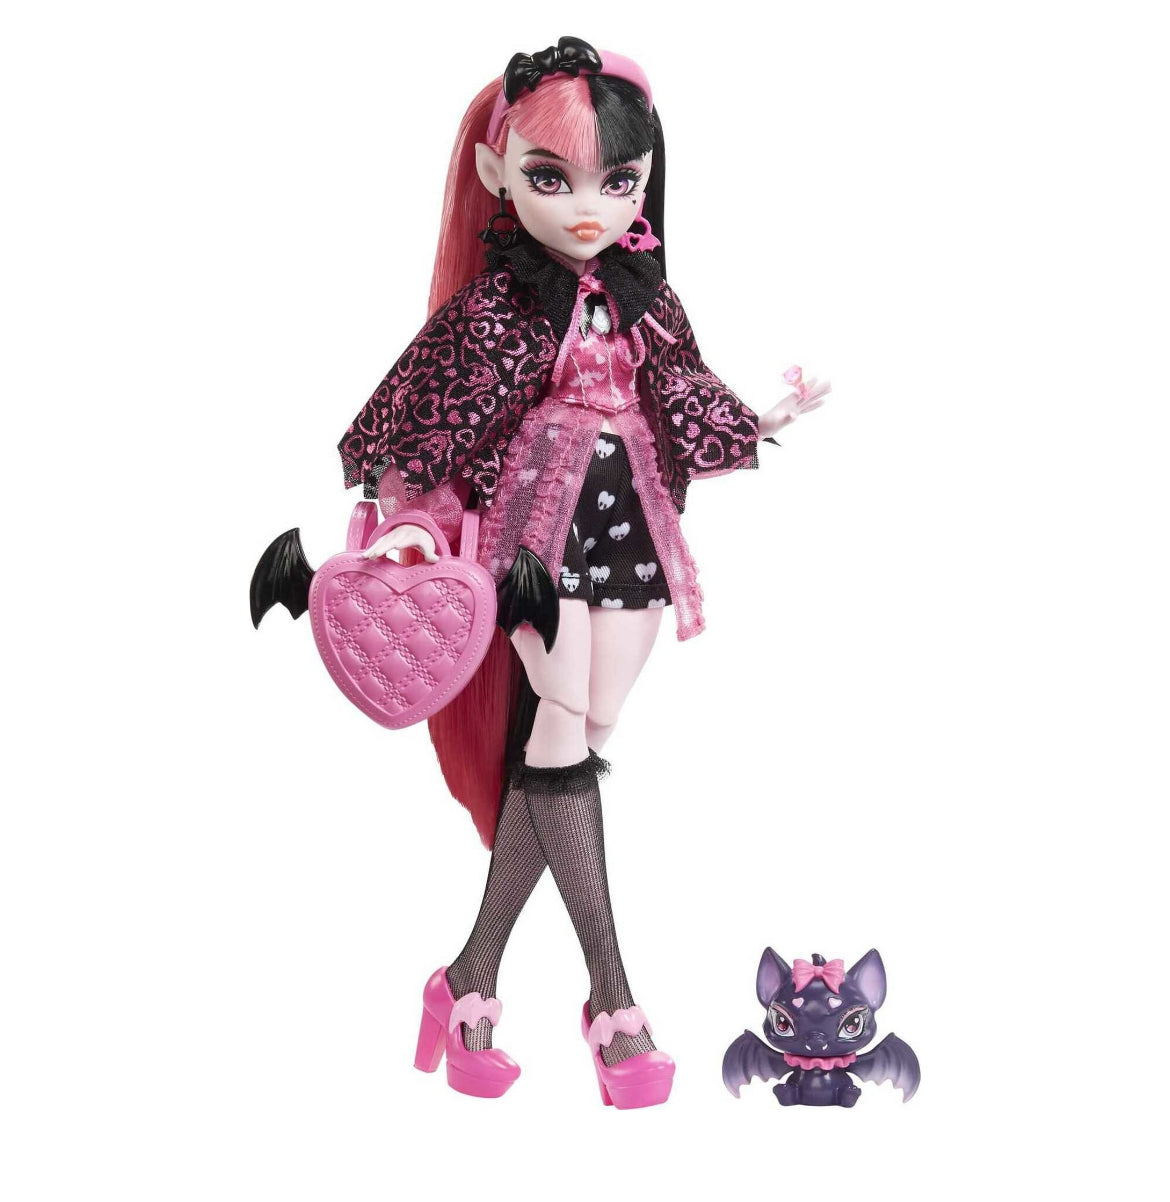 Monster High Draculaura Fashion Doll with Pink & Black Hair, Accessories & Pet Bat